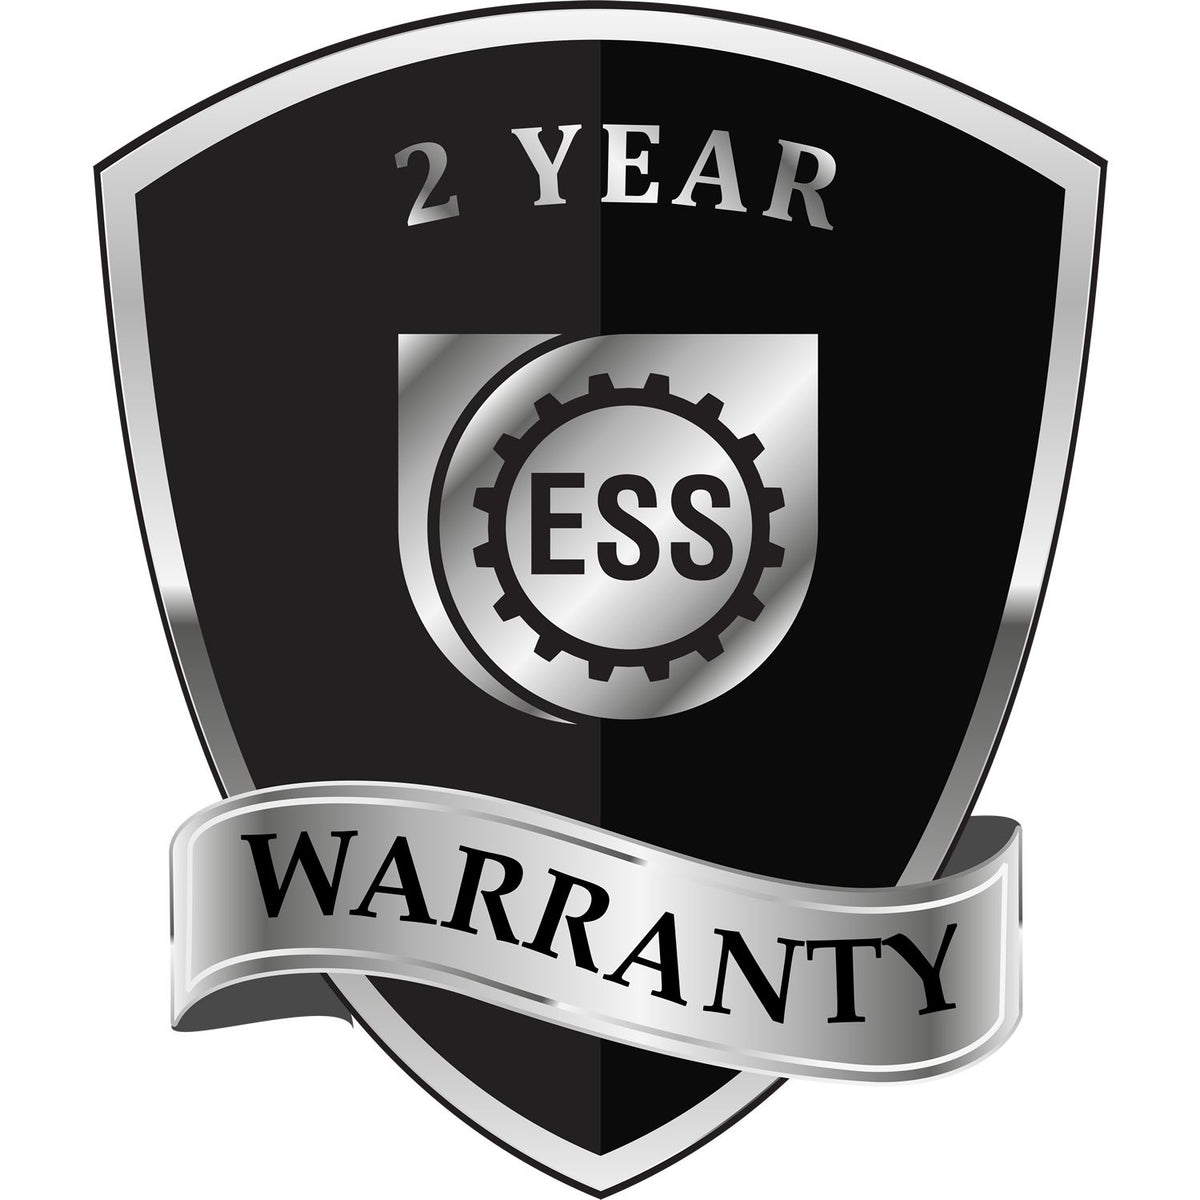 A black and silver badge or emblem showing warranty information for the Hybrid South Carolina Engineer Seal